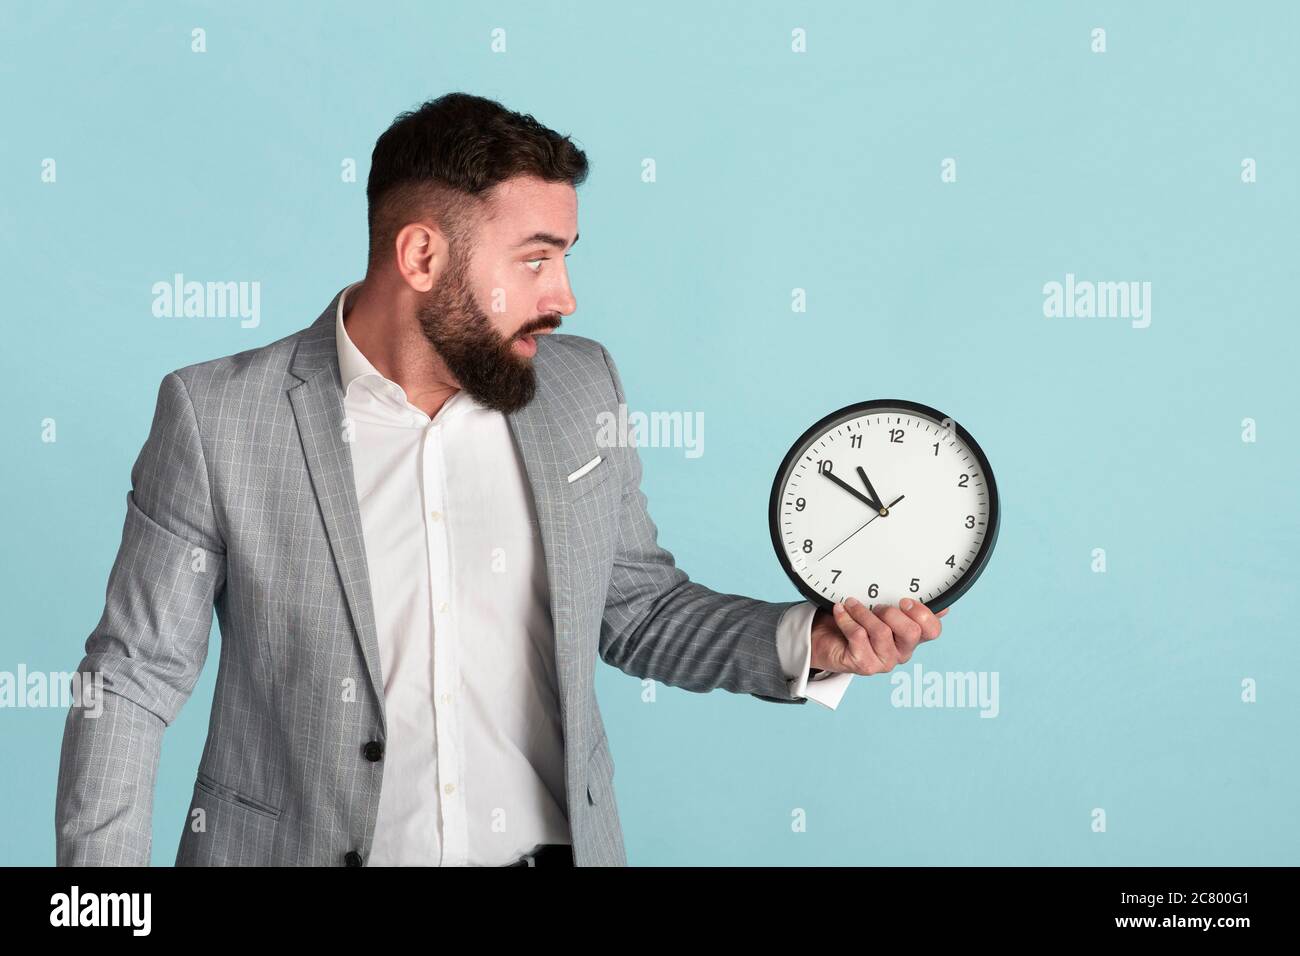 Time management problem. Scared corporate worker with analog clock missing deadline over blue background Stock Photo